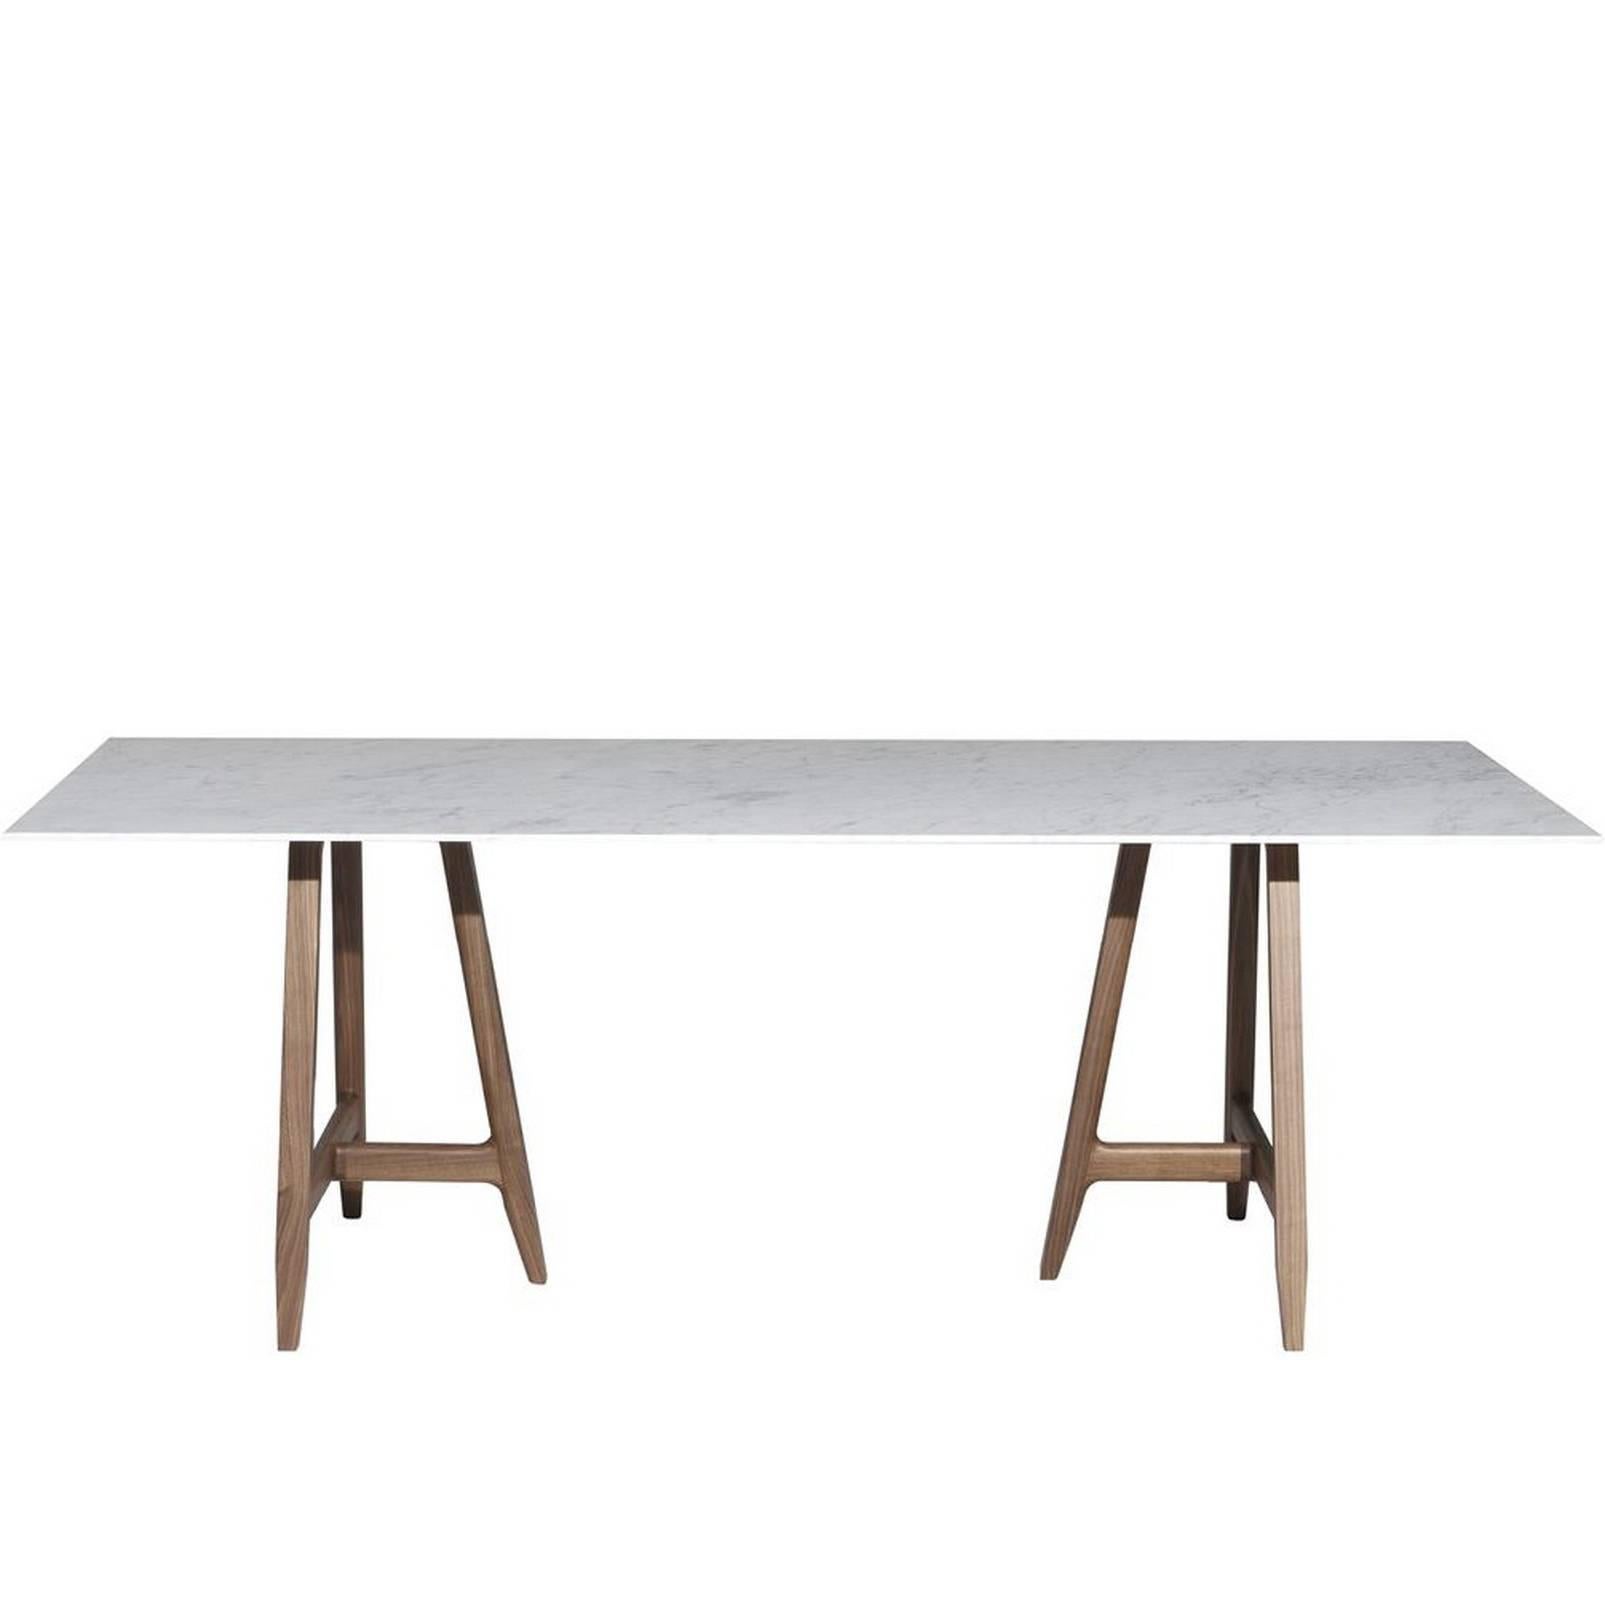 "Easel" White Carrara Marble Top Table Designed by L. and R. Palomba for Driade